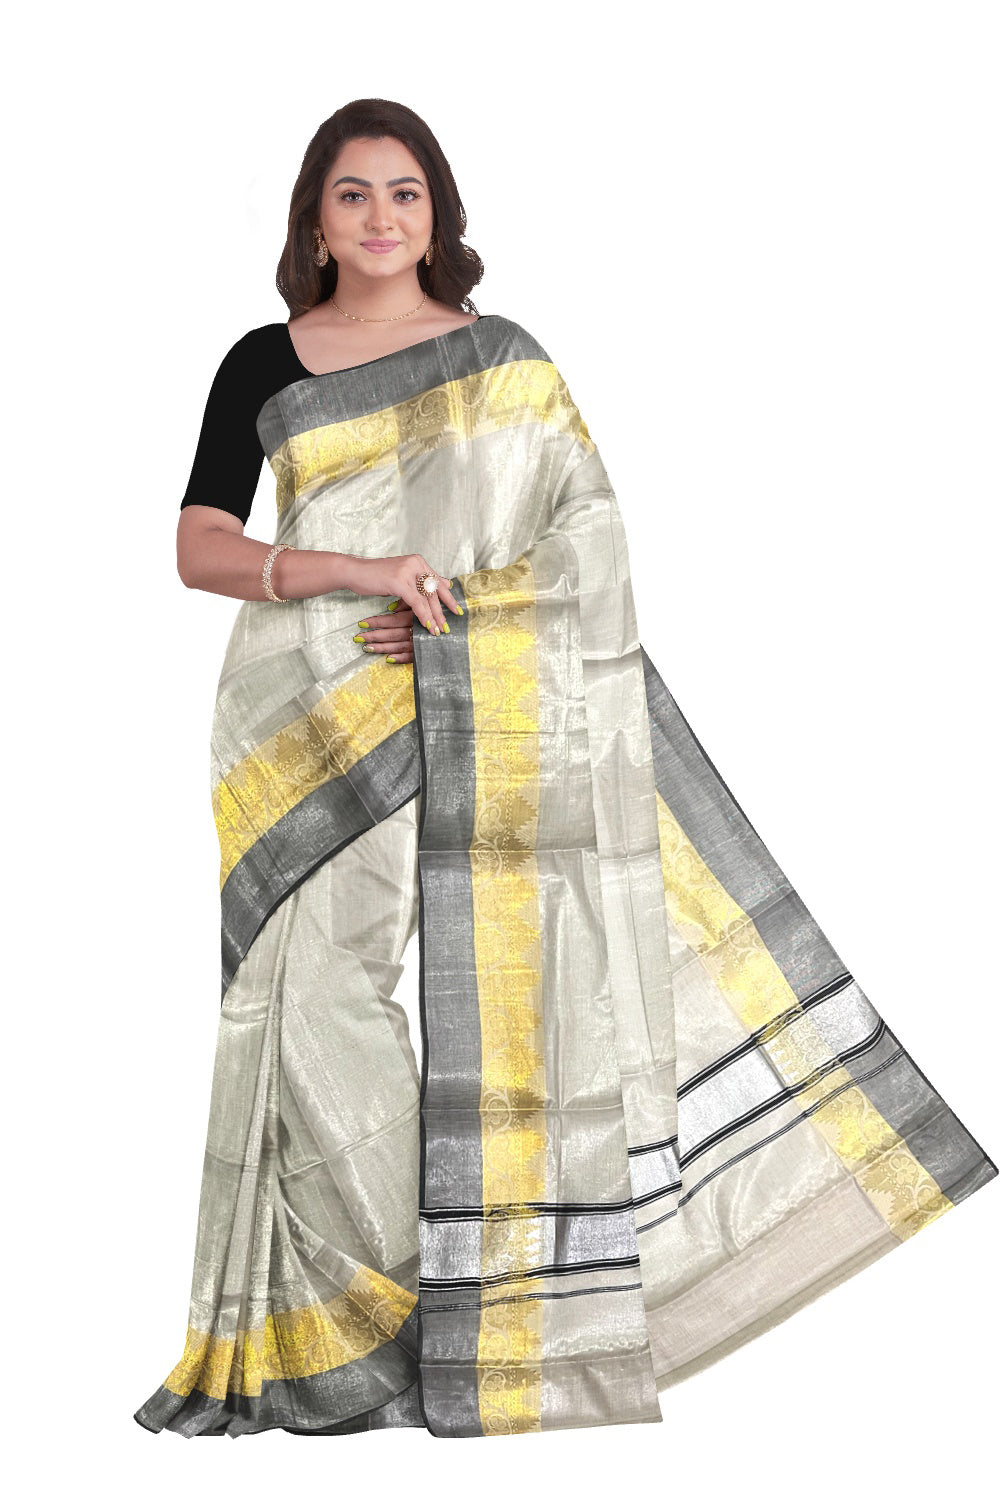 Kerala Silver Tissue Plain Saree with Black and Golden Floral Self Work Border